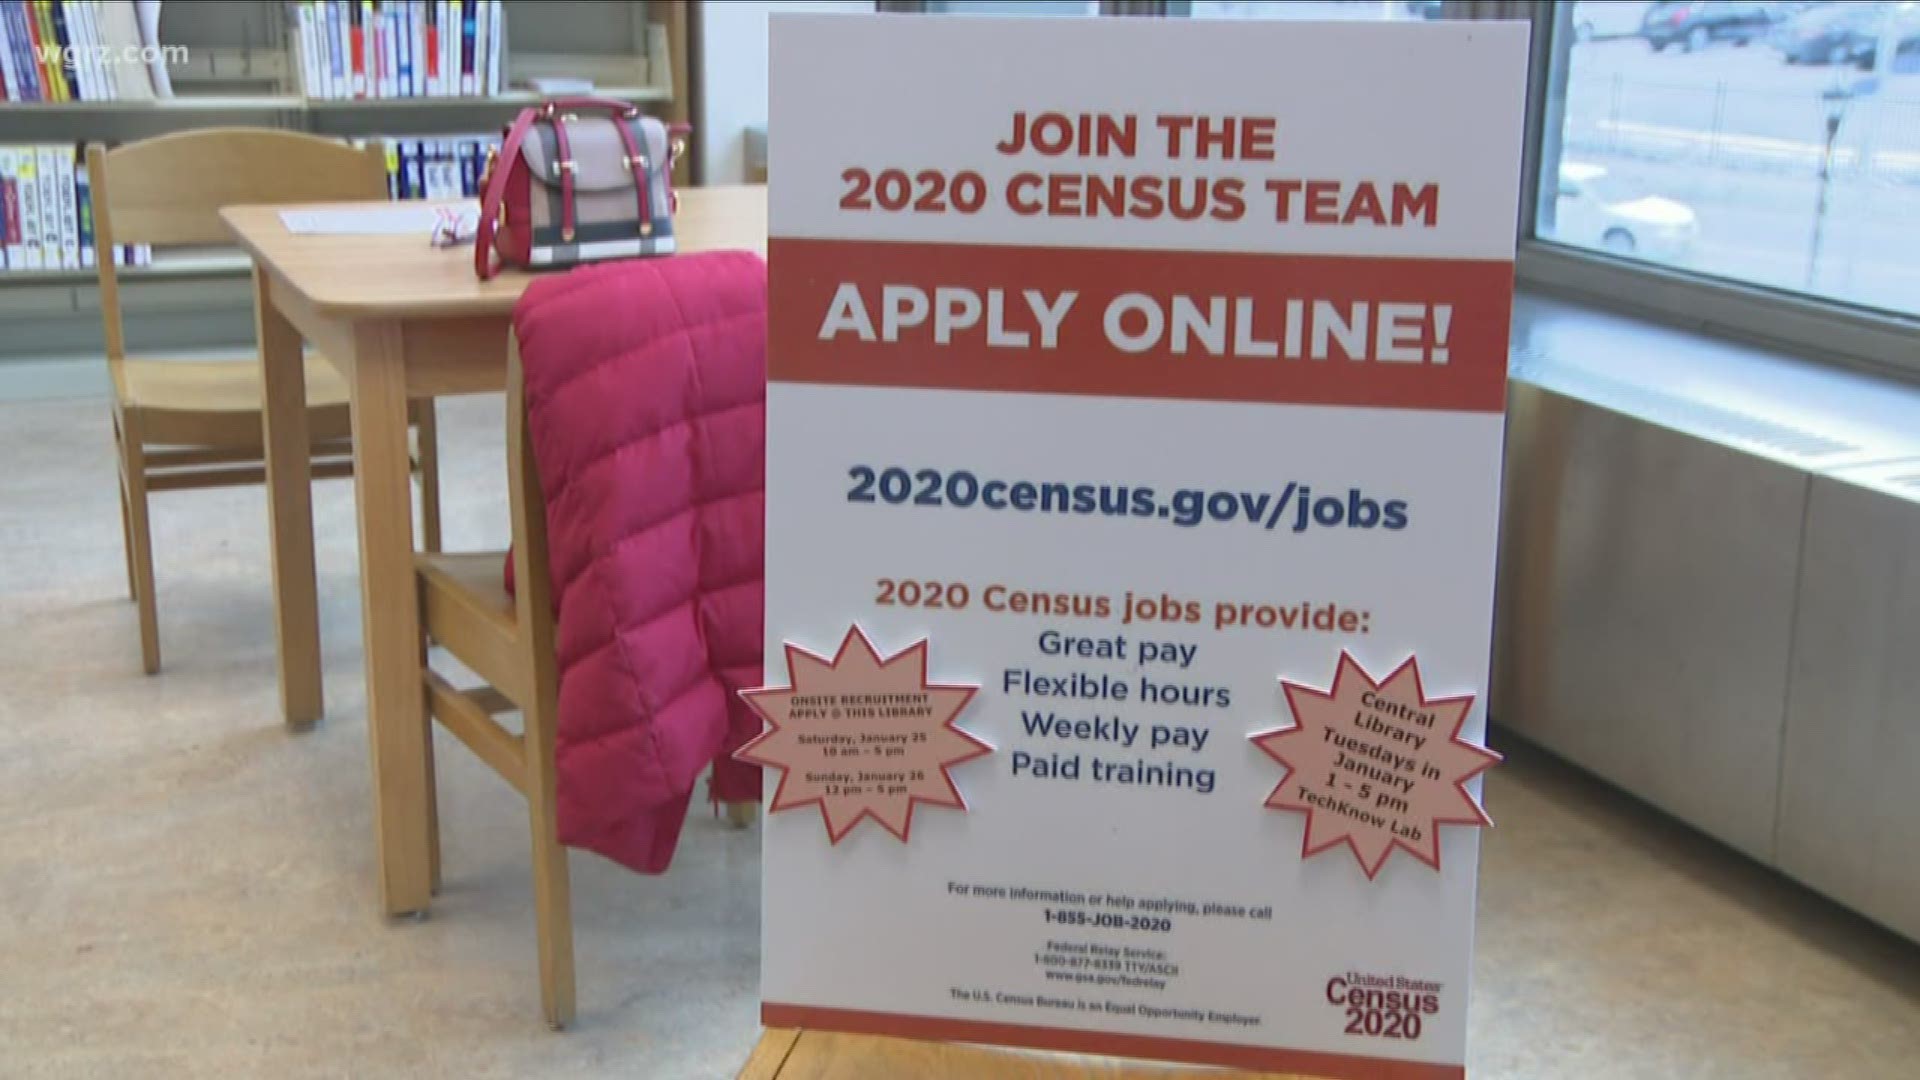 In addition to recruiting people from different communities, the census takers should be willing to engage with their communities and others around Erie County.